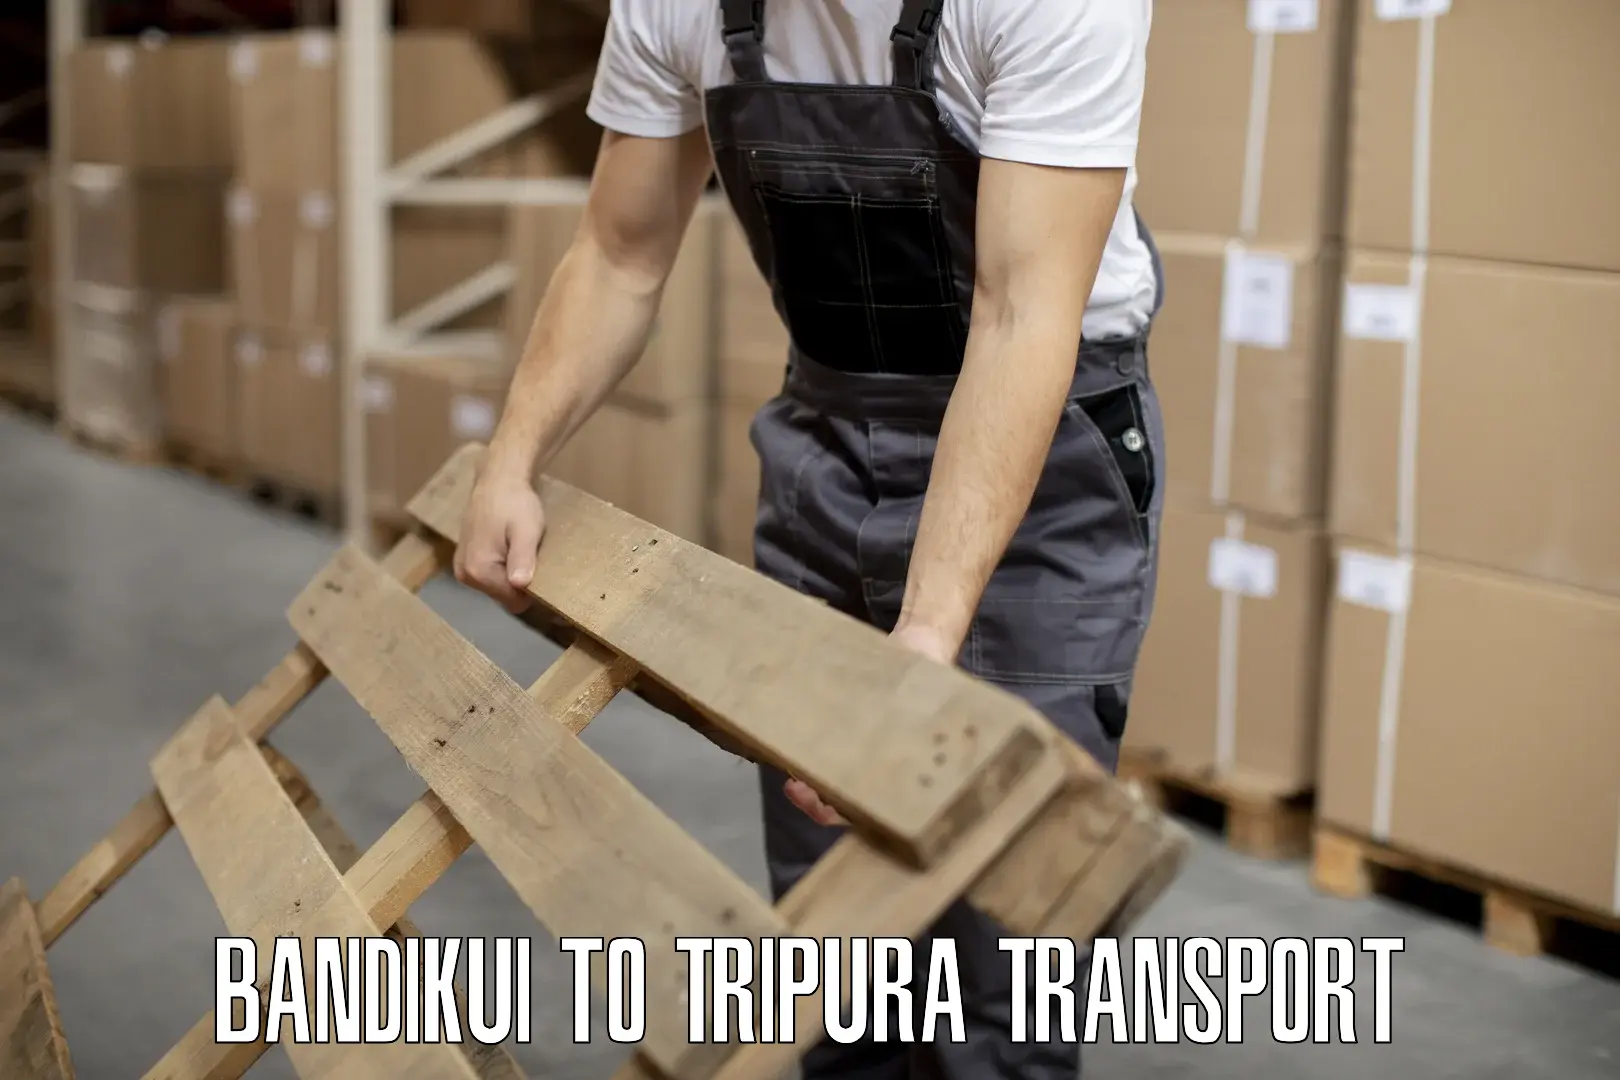 Transport bike from one state to another Bandikui to Tripura